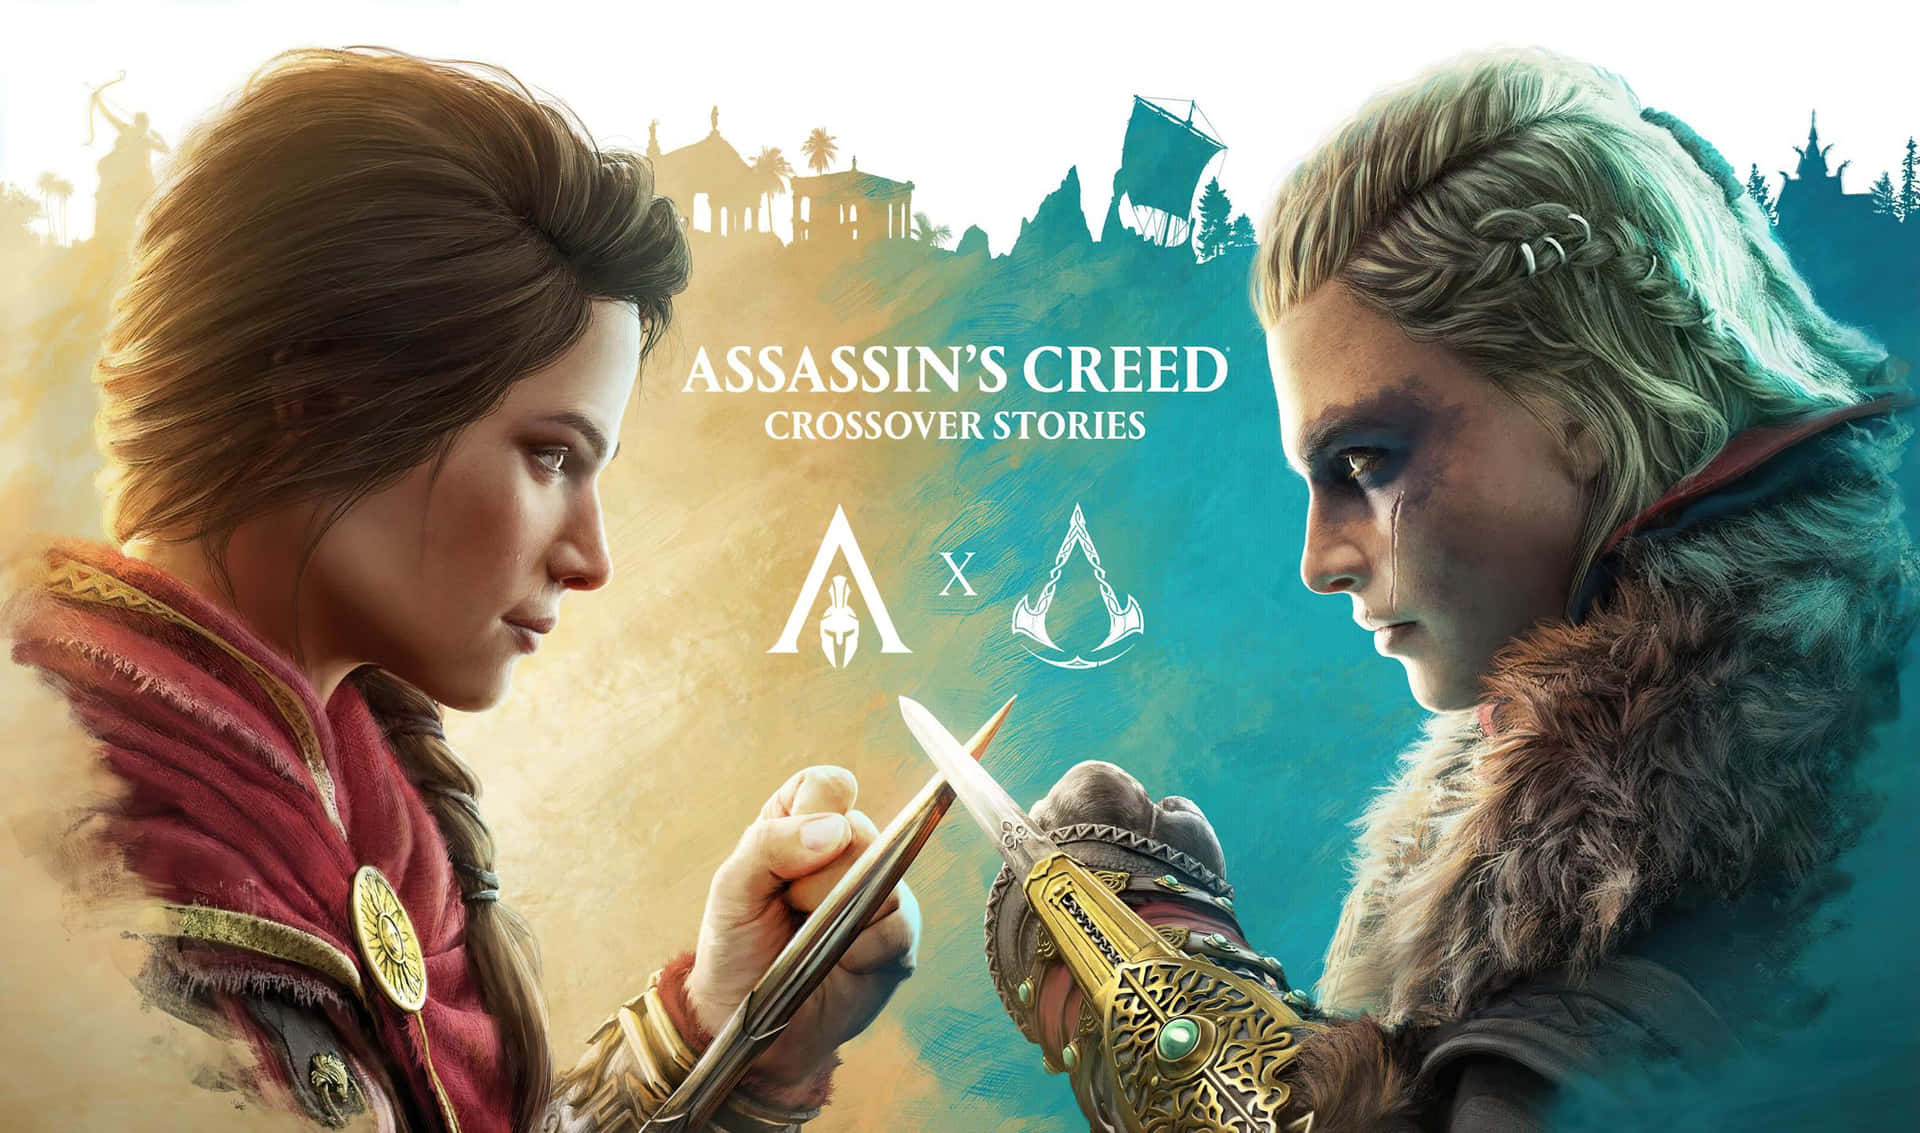 Explore the Nordic lands in Assassin's Creed Valhalla!